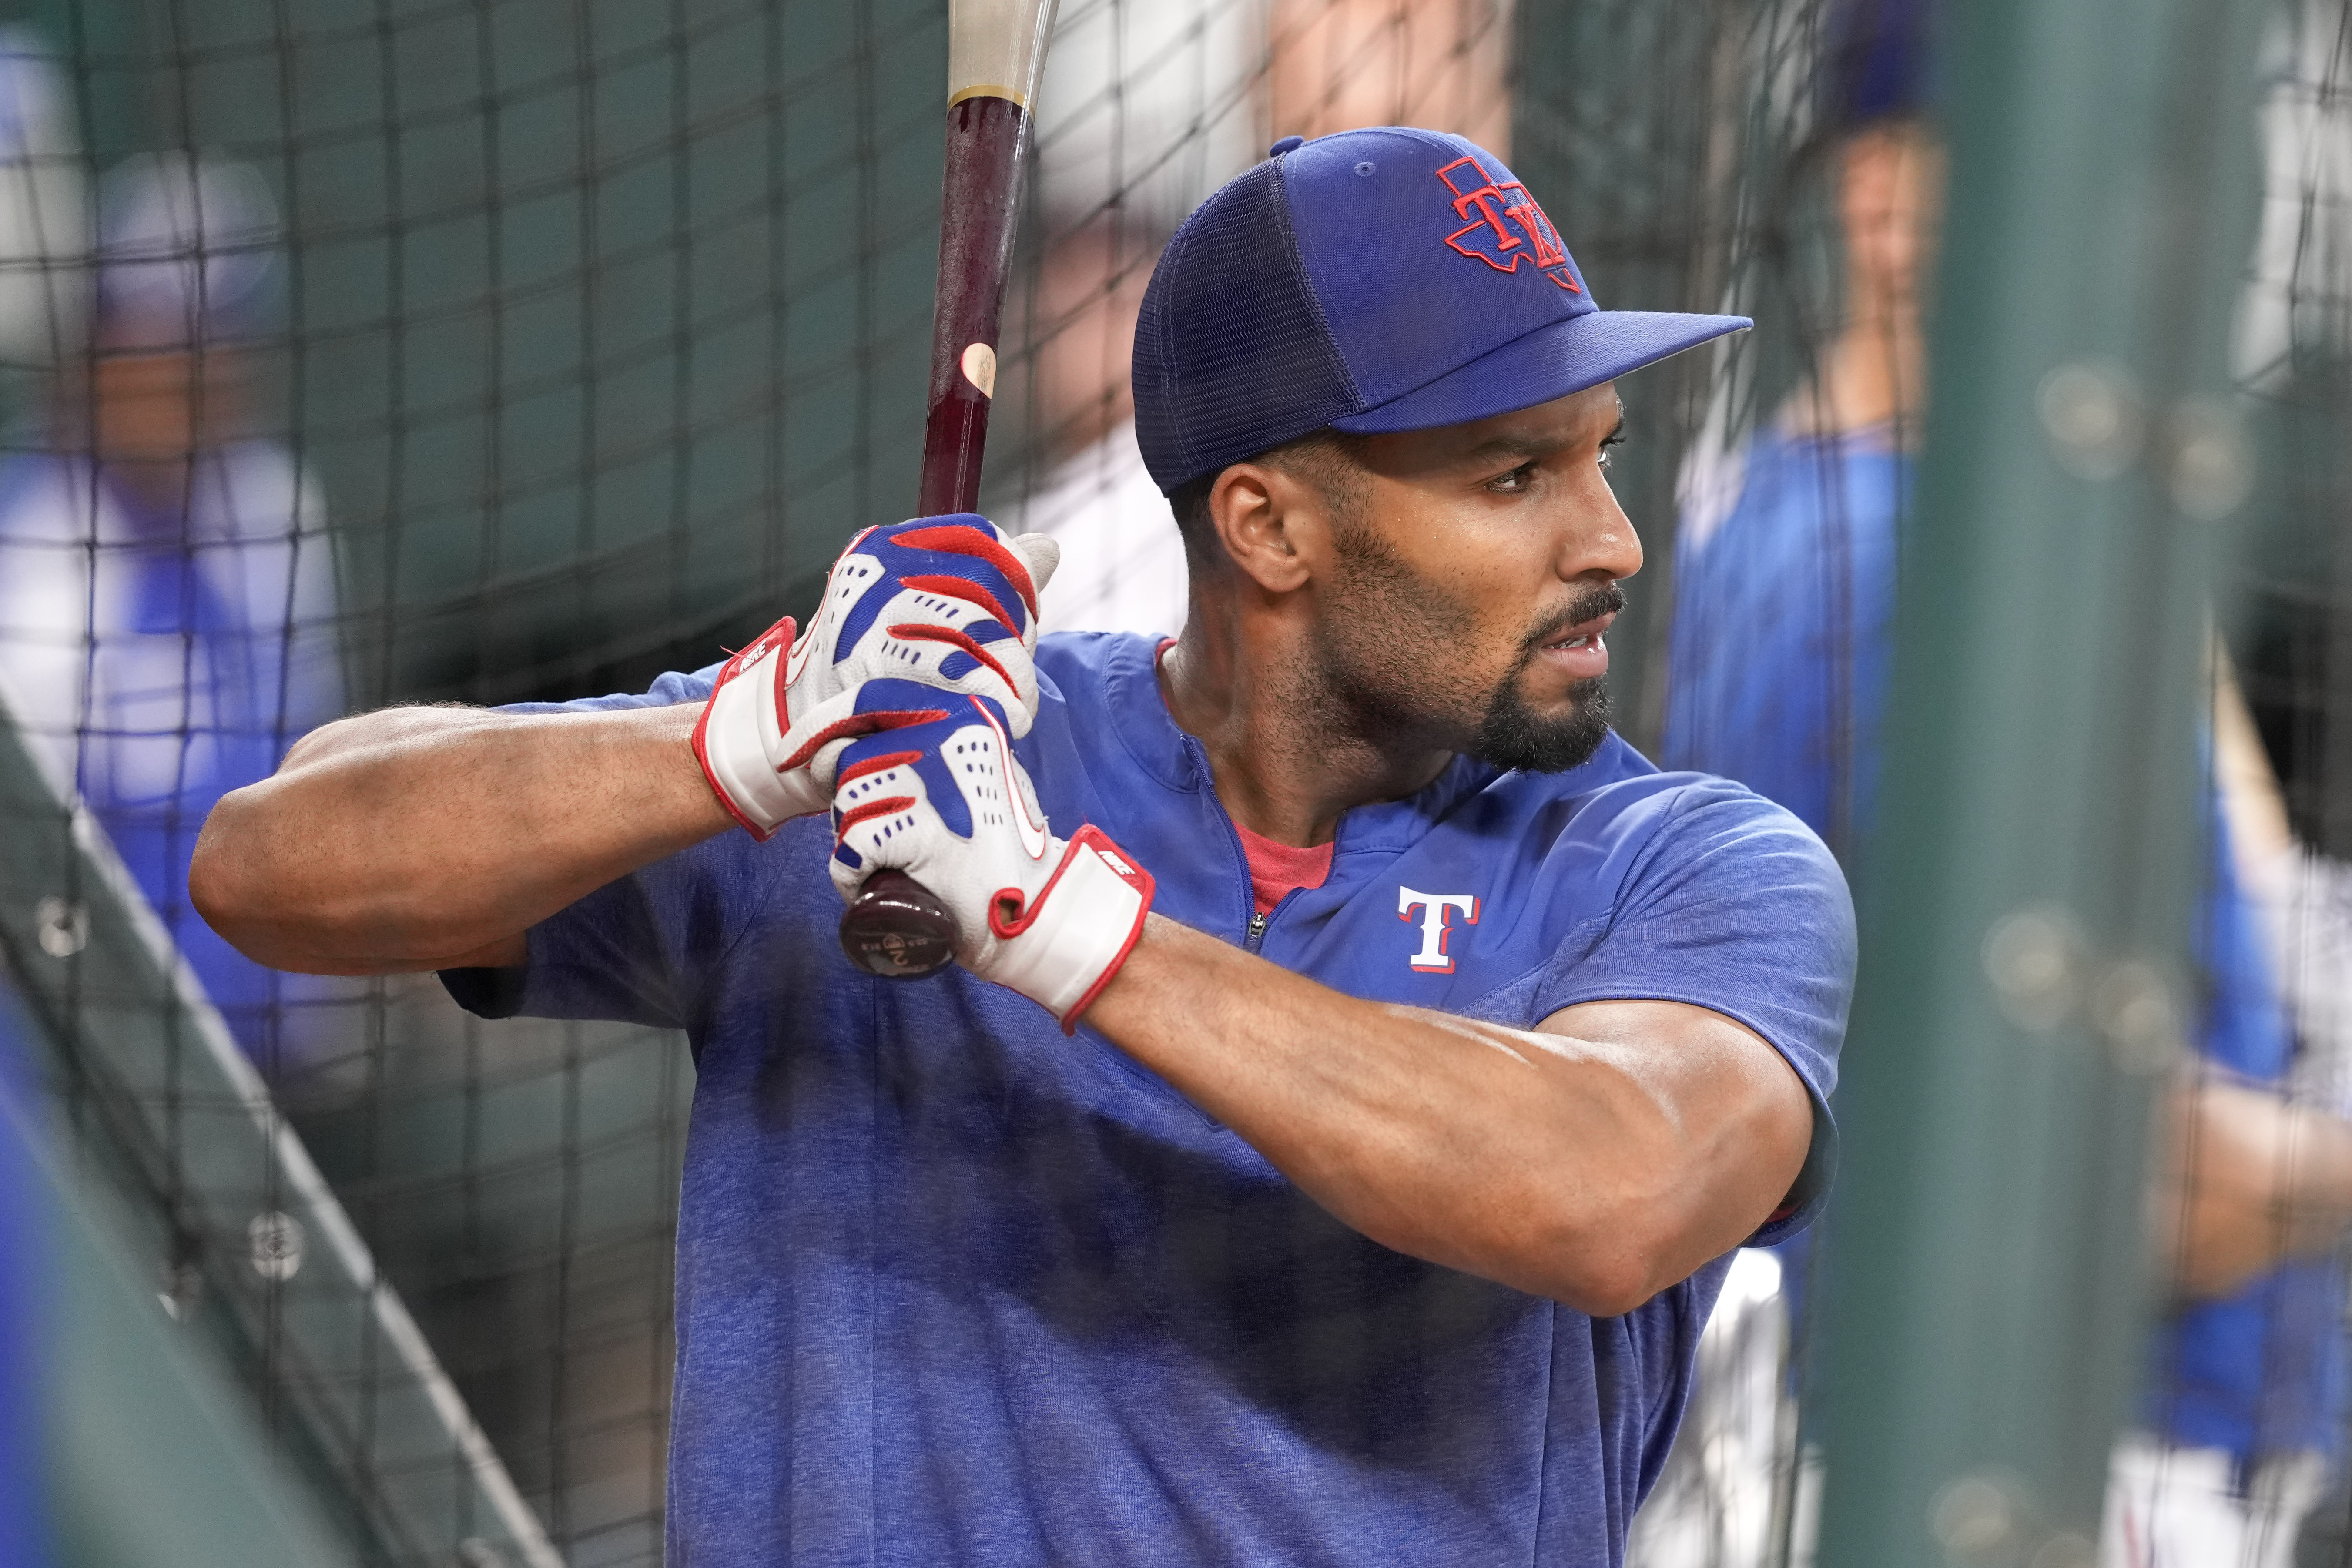 Rangers' Marcus Semien get doubled up due to batting glove